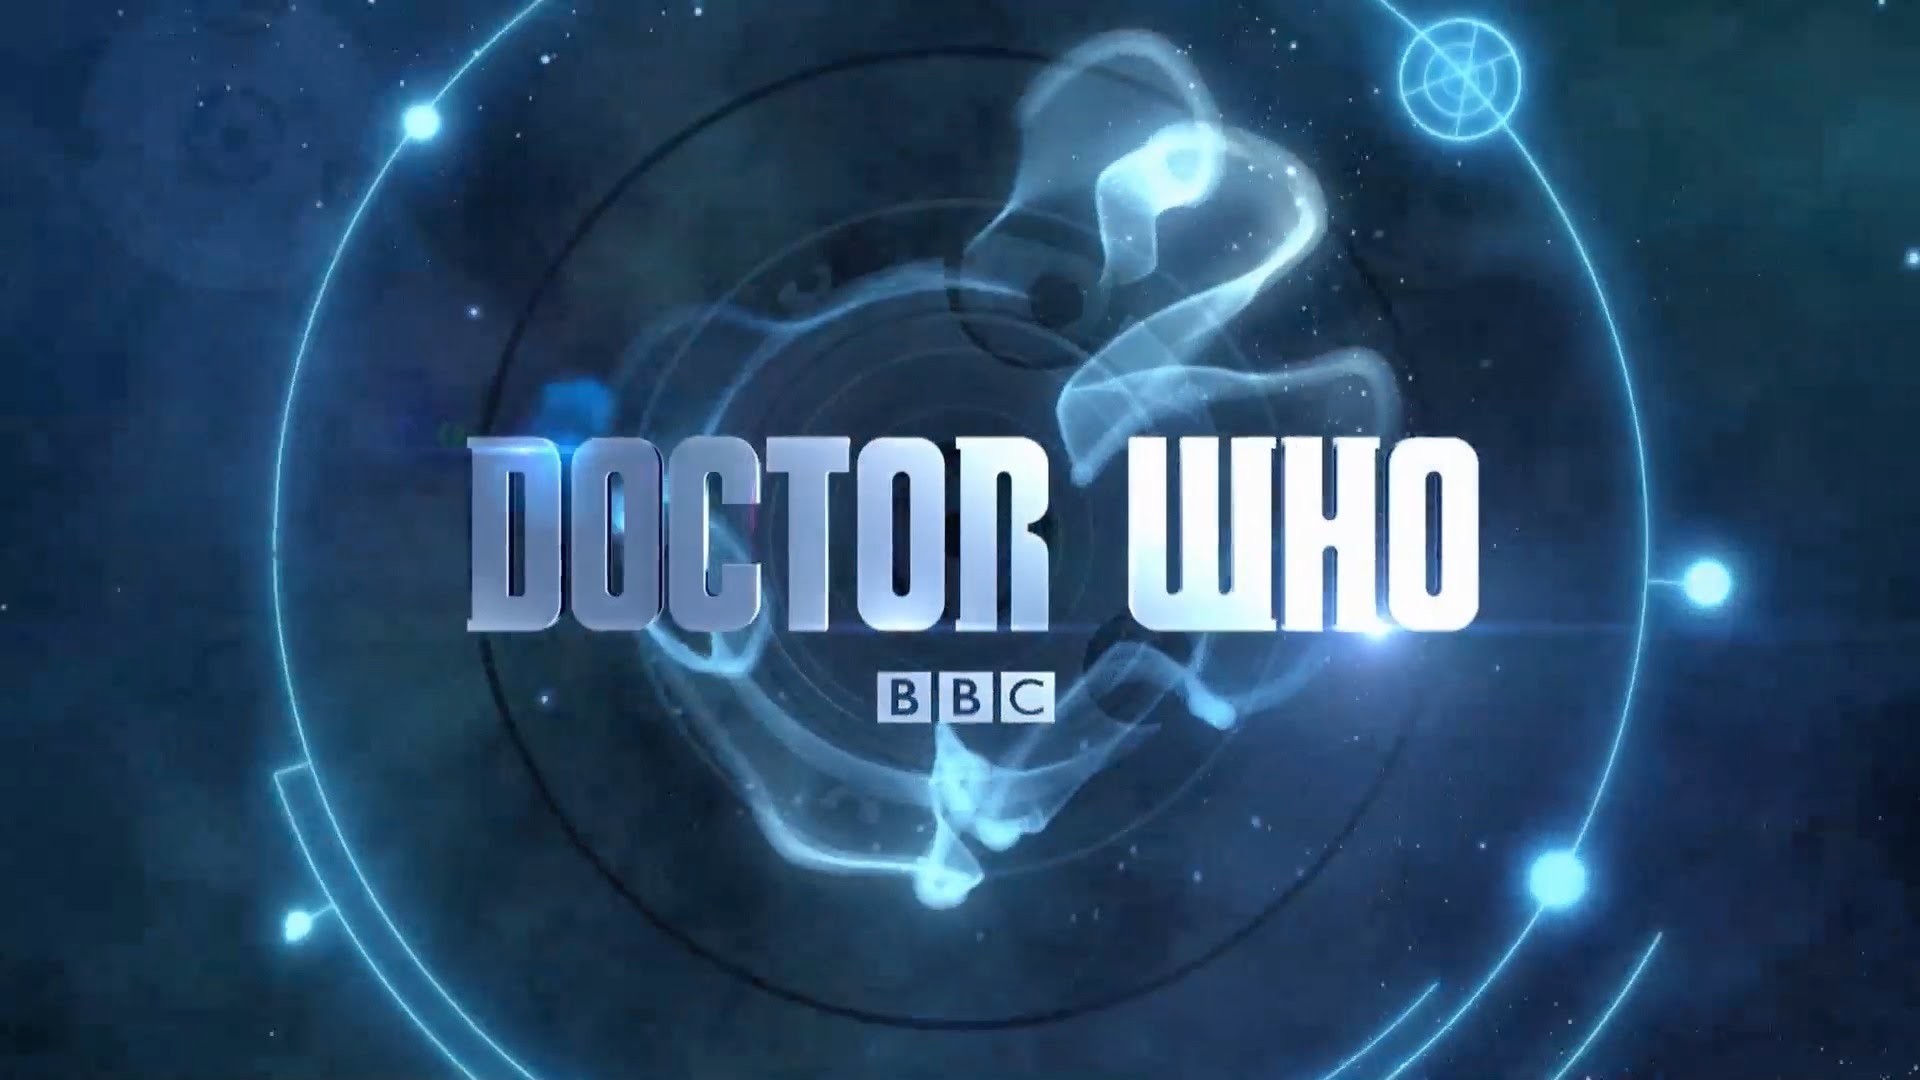 1920x1080 Doctor Who Theme: The Rock Version! - Doctor Who: Series 9 (2015) - BBC -  YouTube